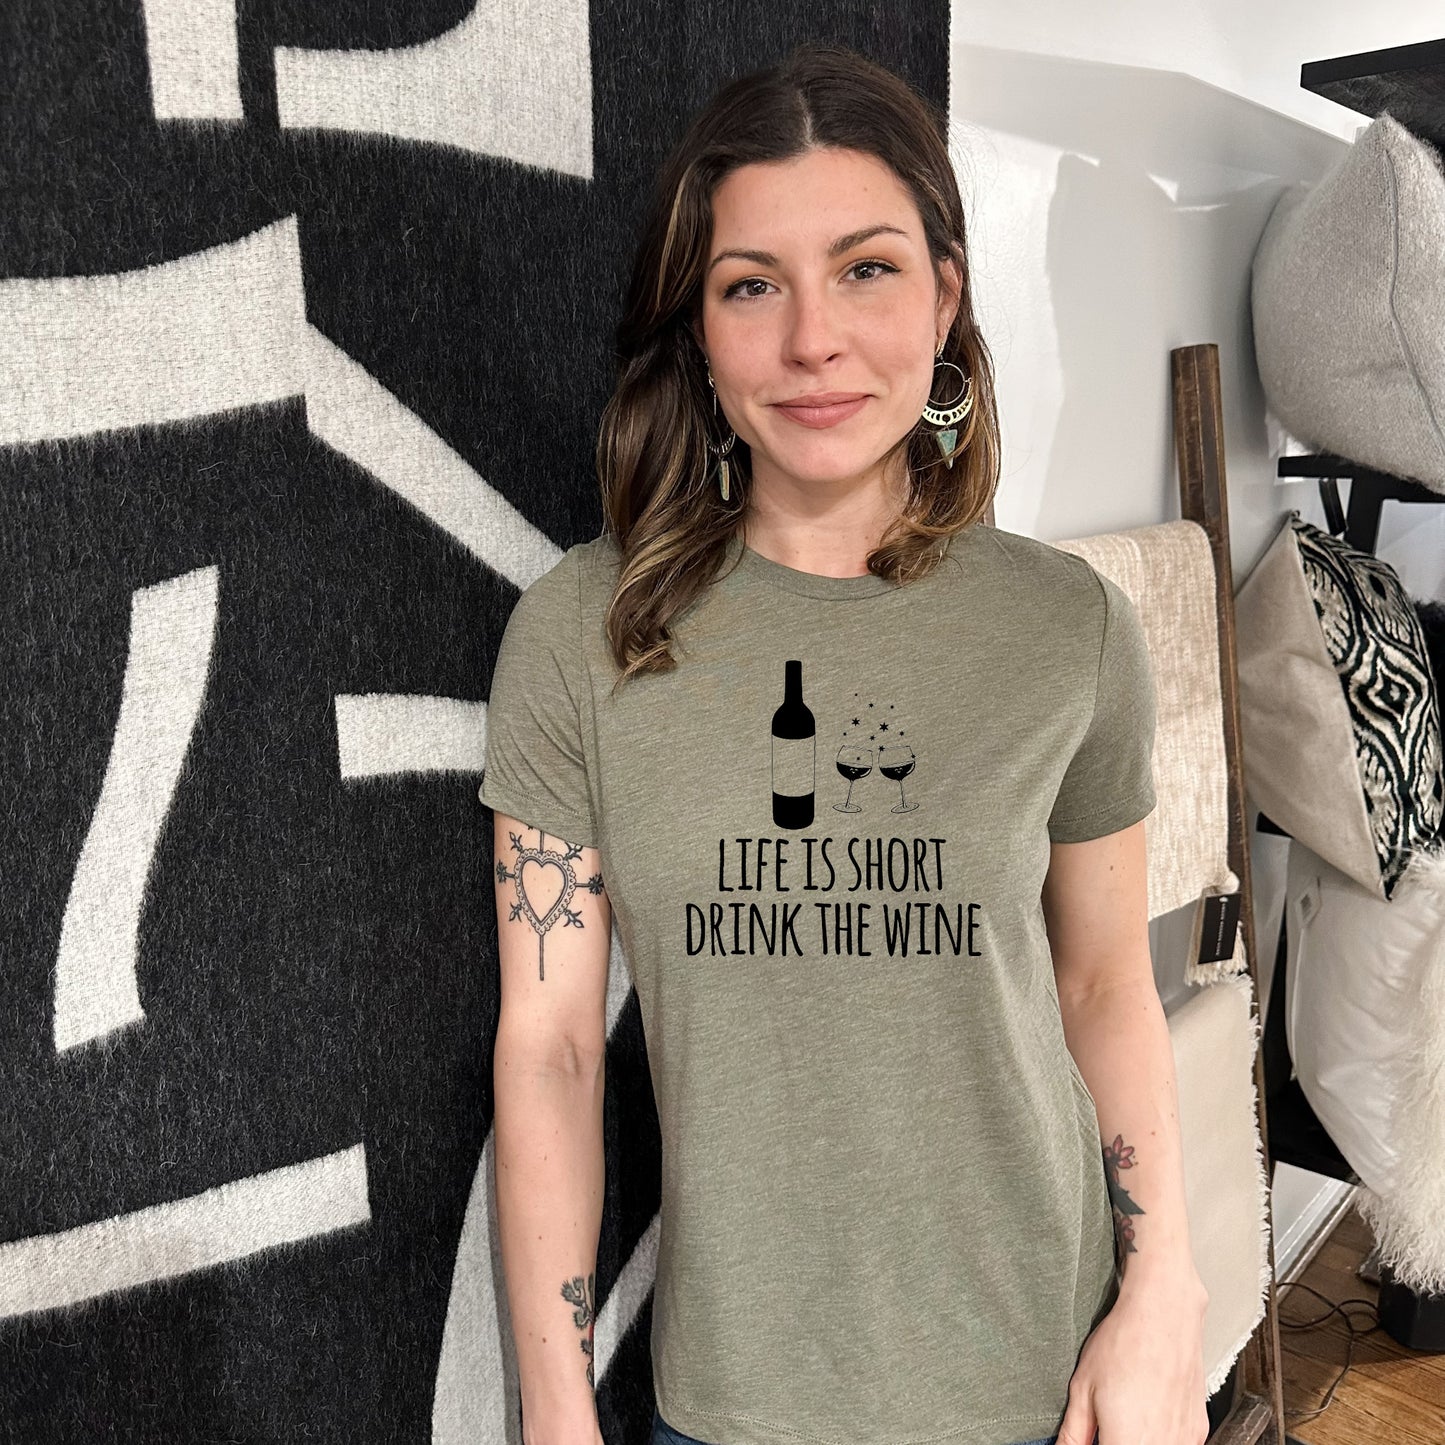 Life Is Short, Drink The Wine - Women's Crew Tee - Olive or Dusty Blue